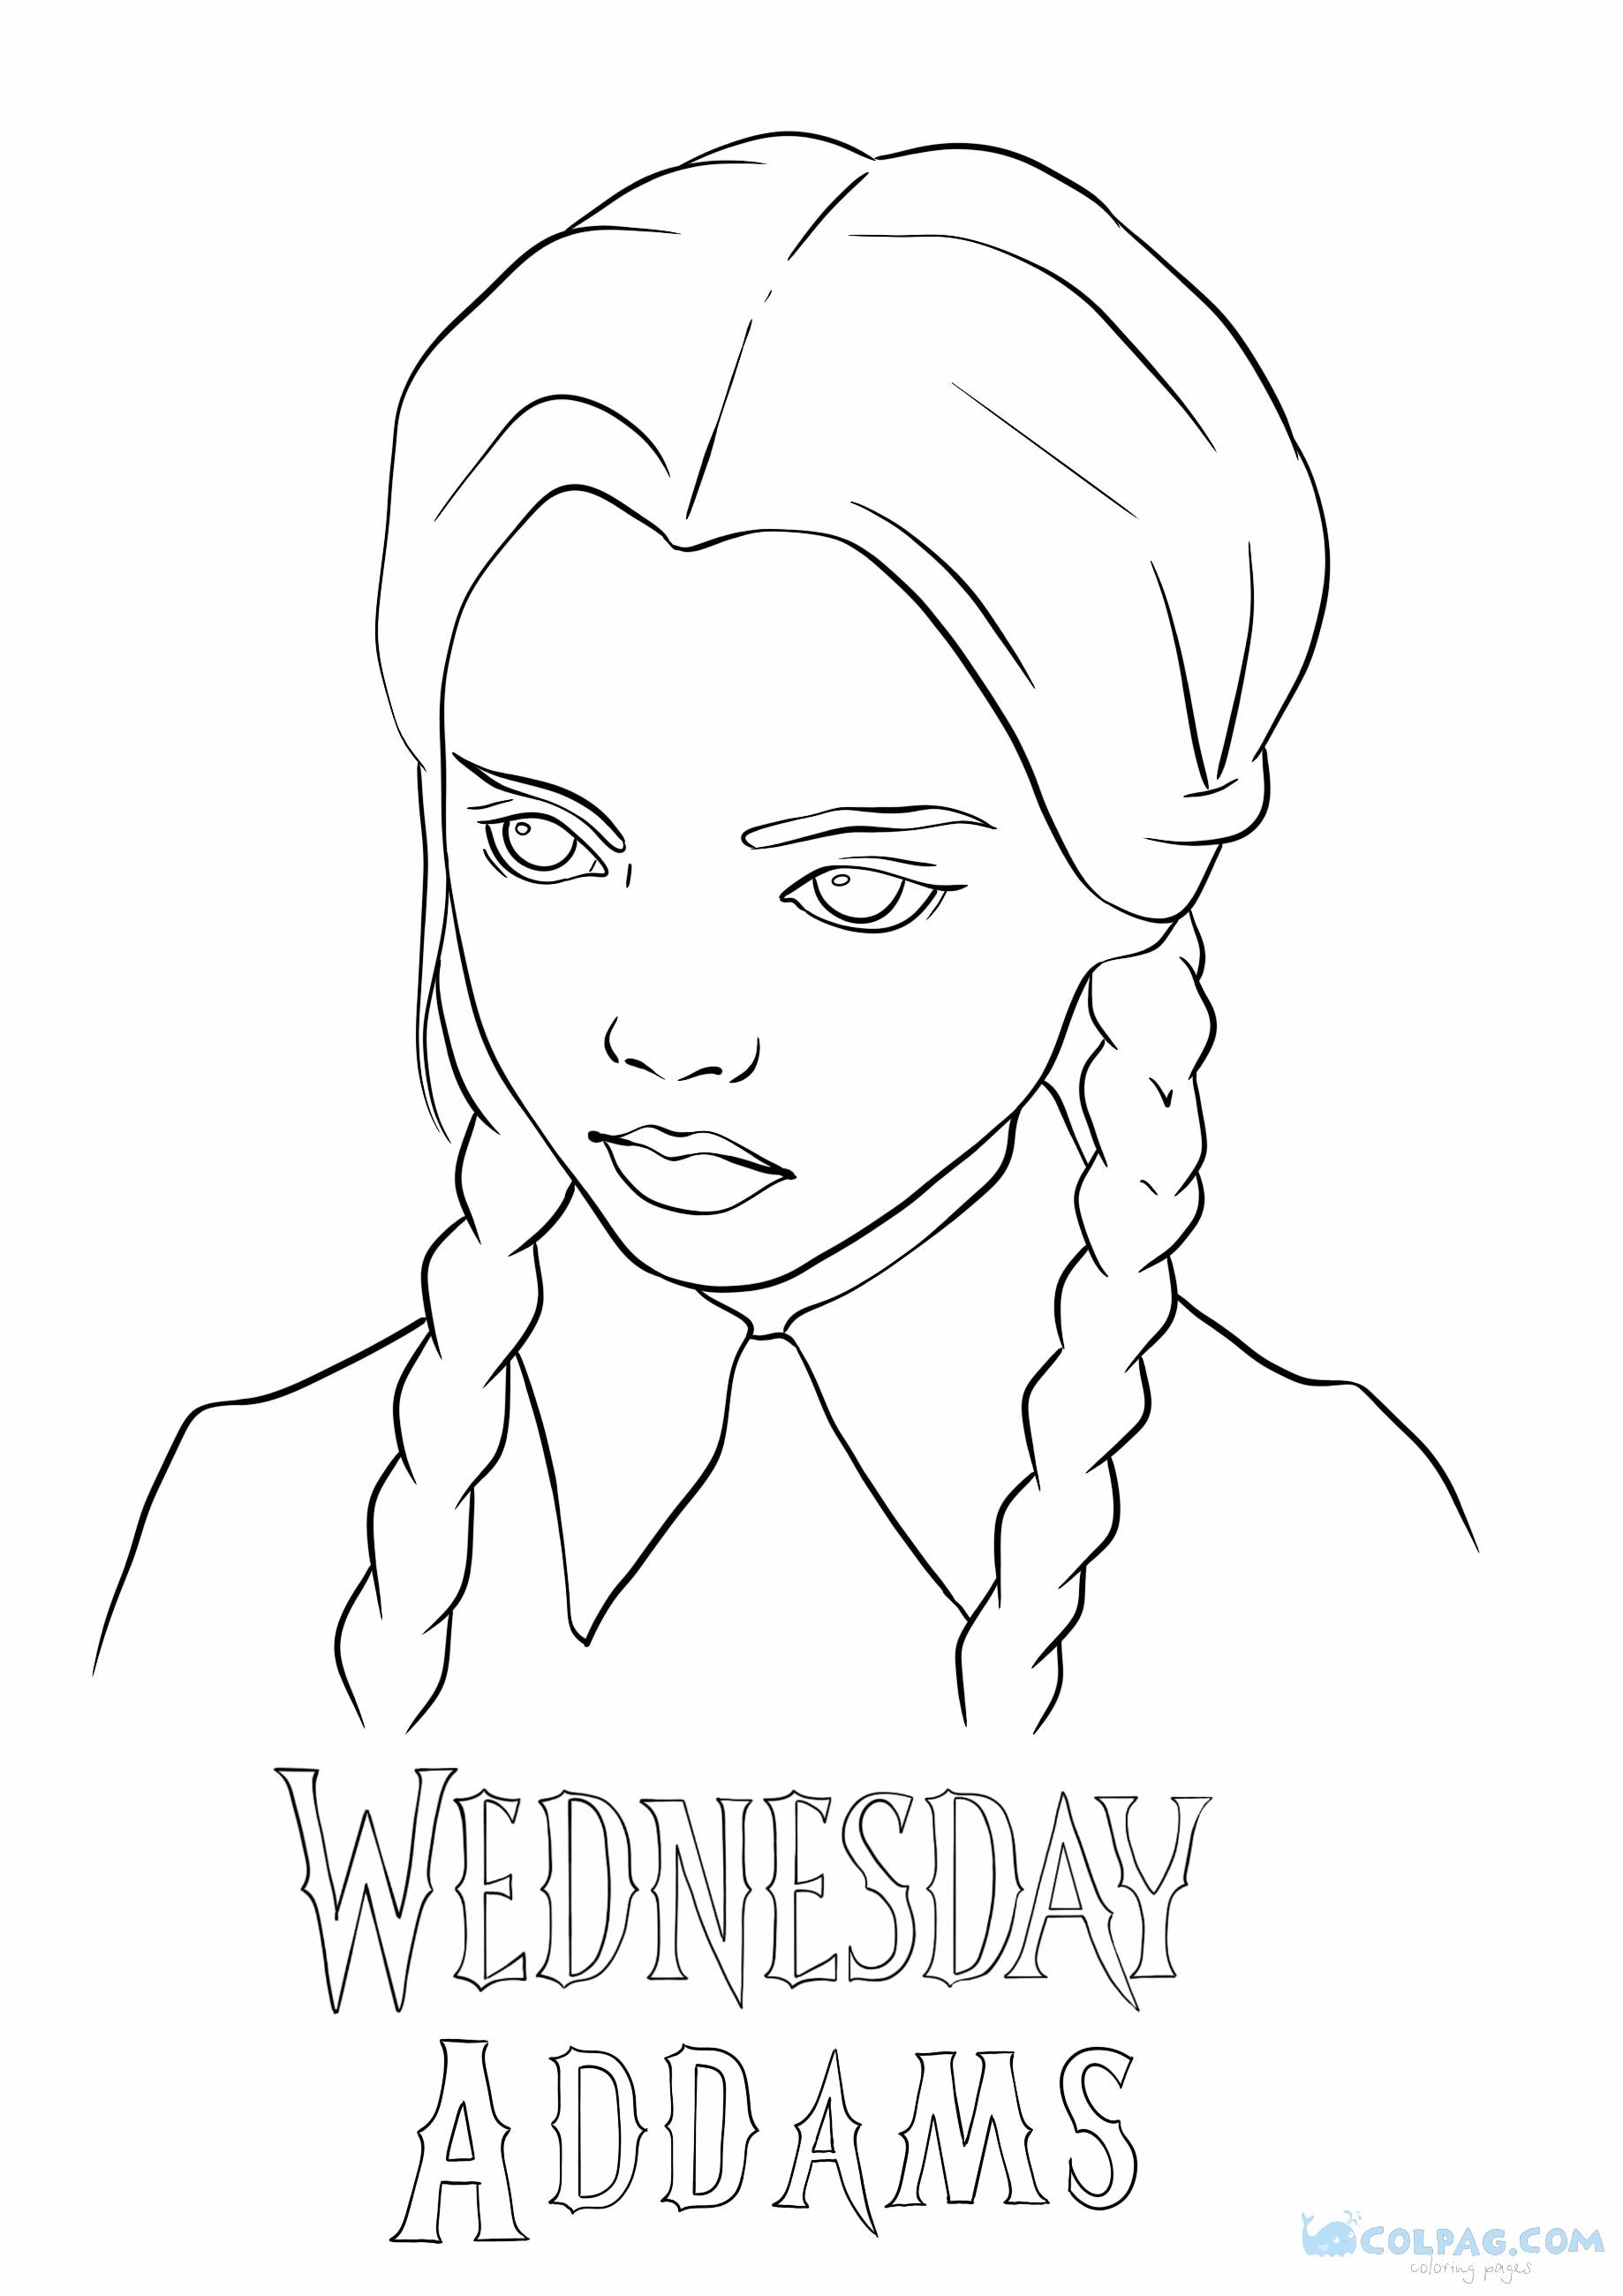 wednesday-addams-coloring-page-colpag-com-20